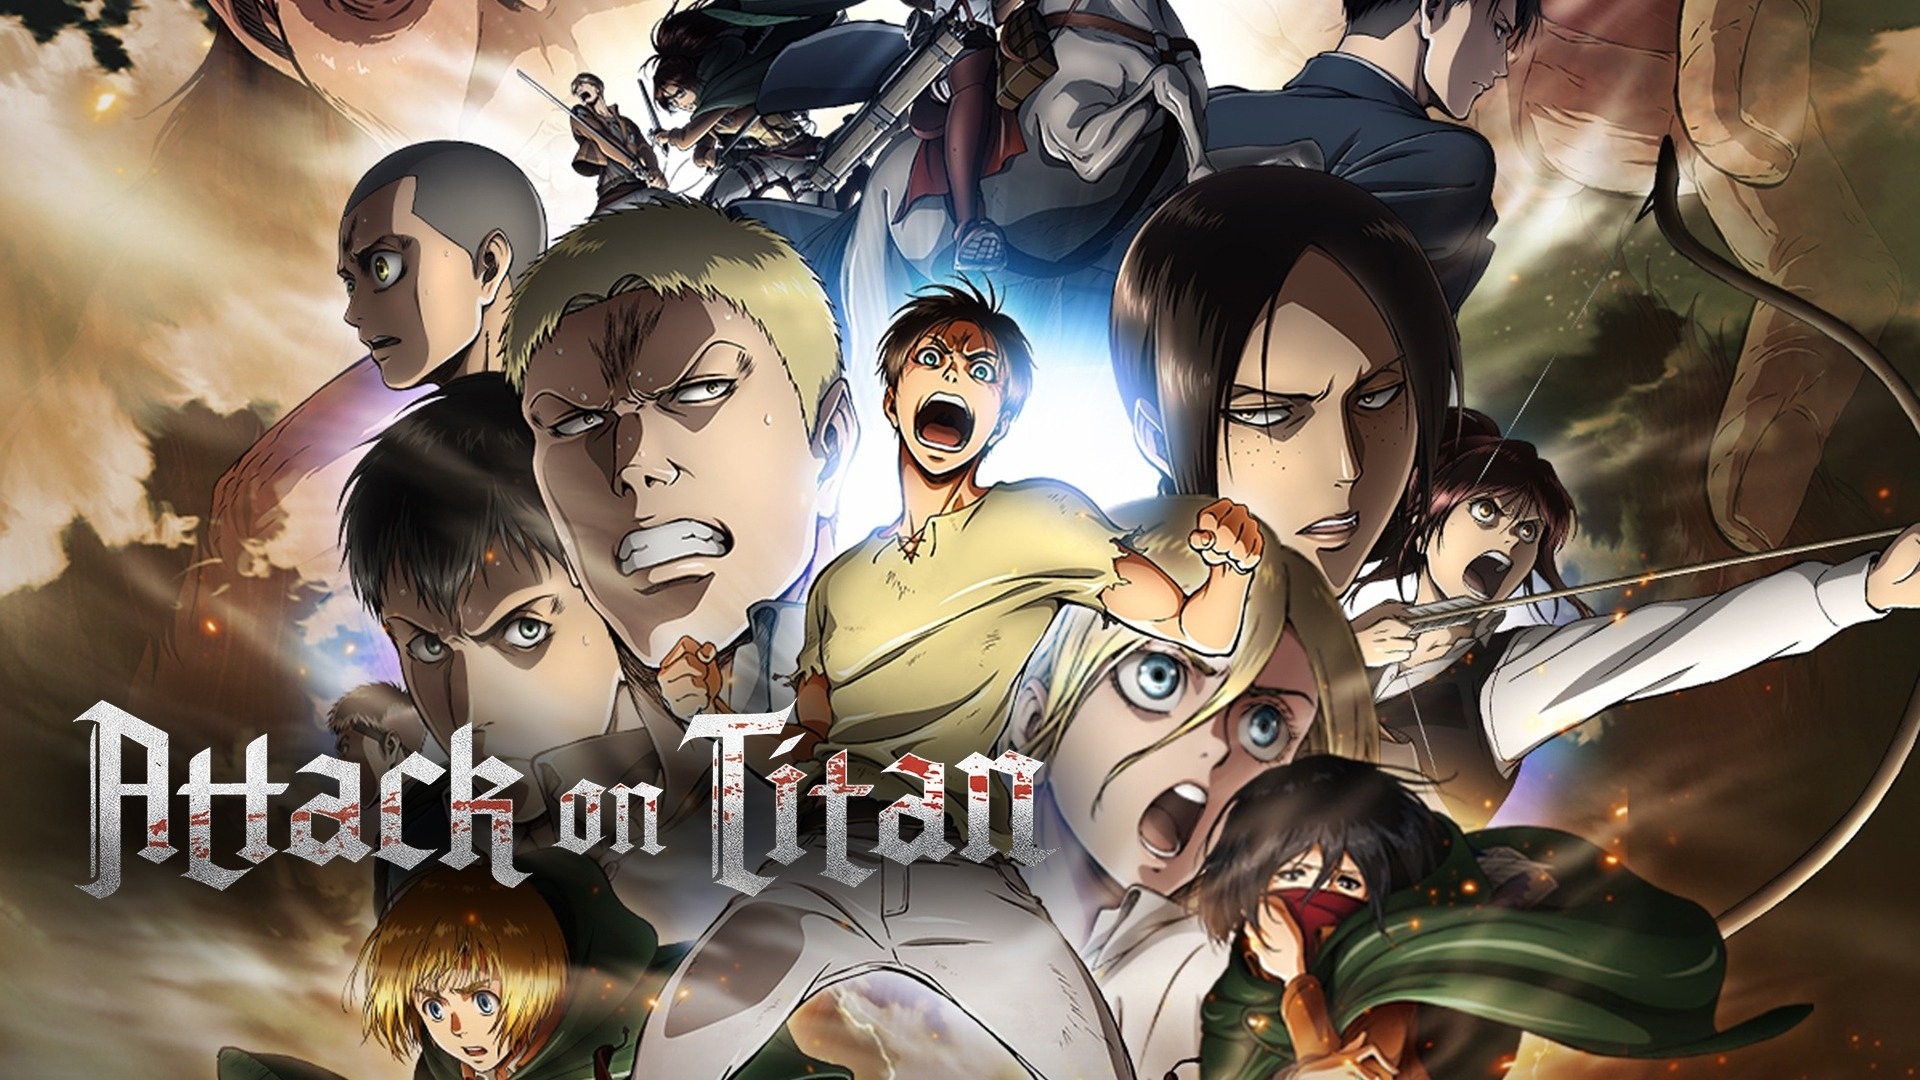 Attack on Titan: End of the World - Rotten Tomatoes